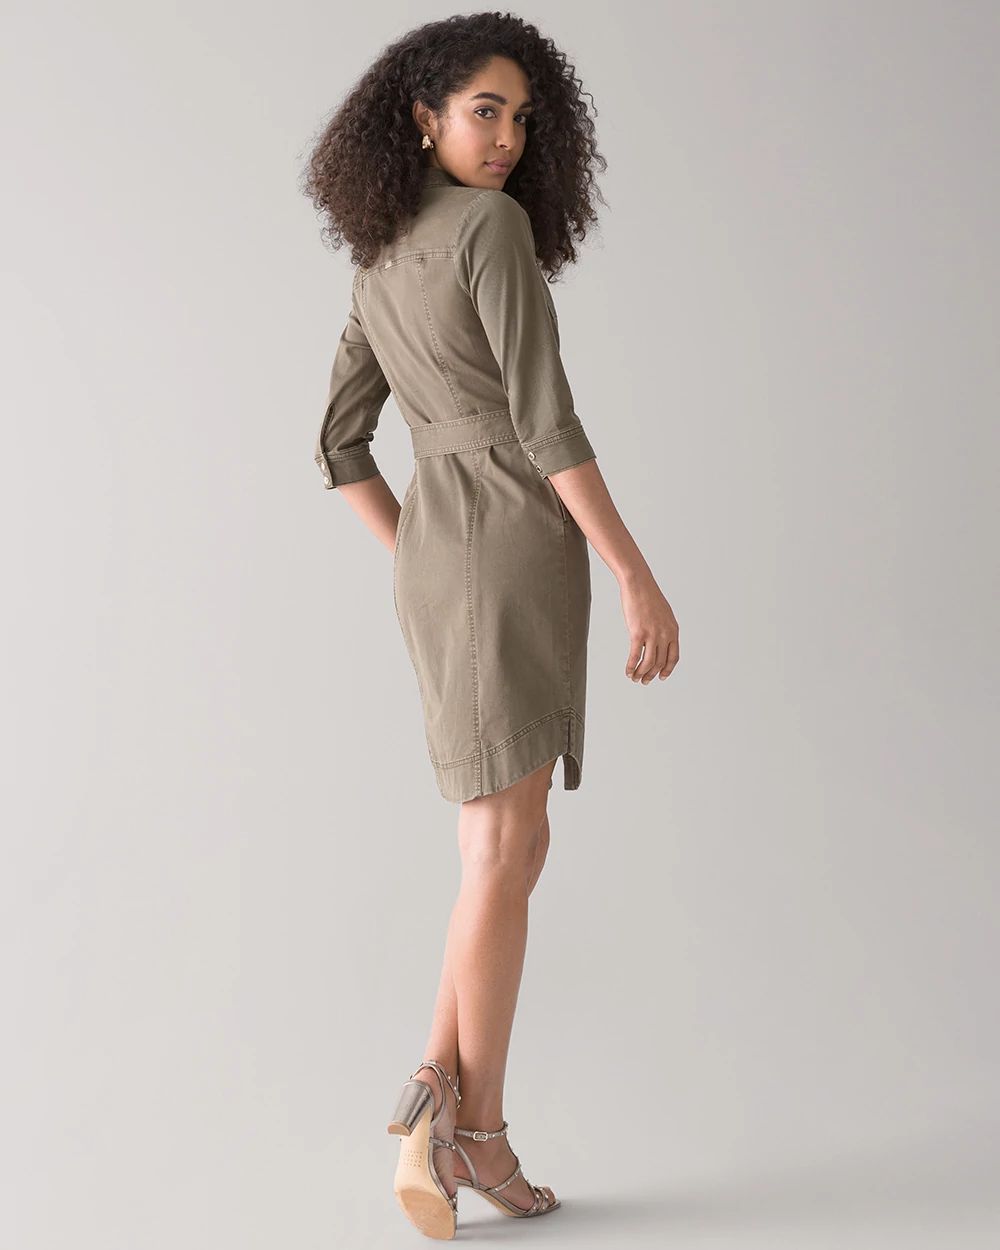 ¾ Sleeve Utility Dress click to view larger image.